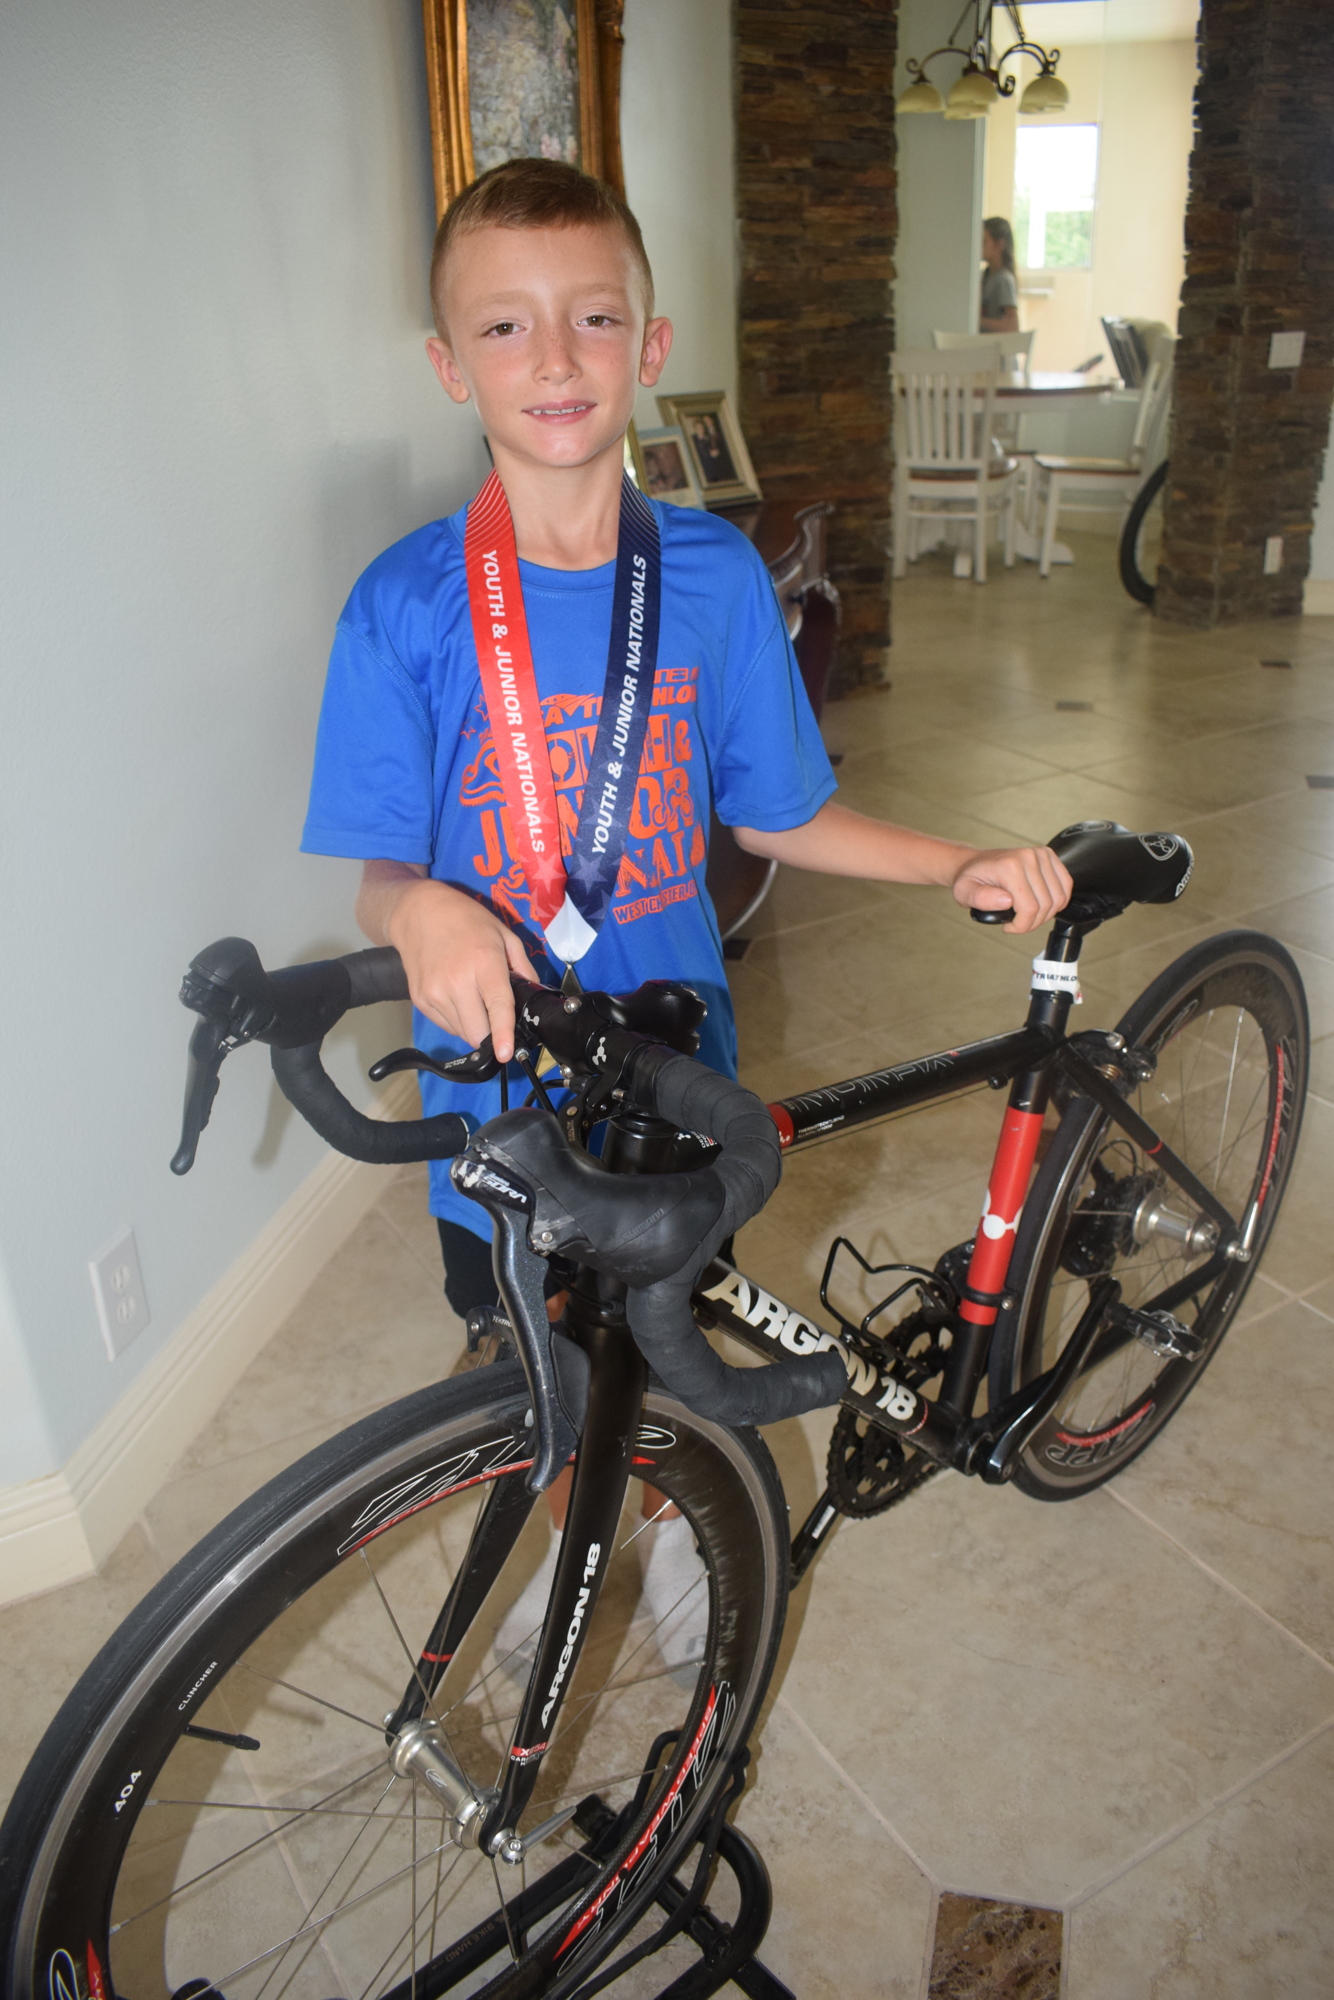 Aaron Westrip is dominating in the cycling portion of the triathlon even though he once struggled to learn to ride a bike.